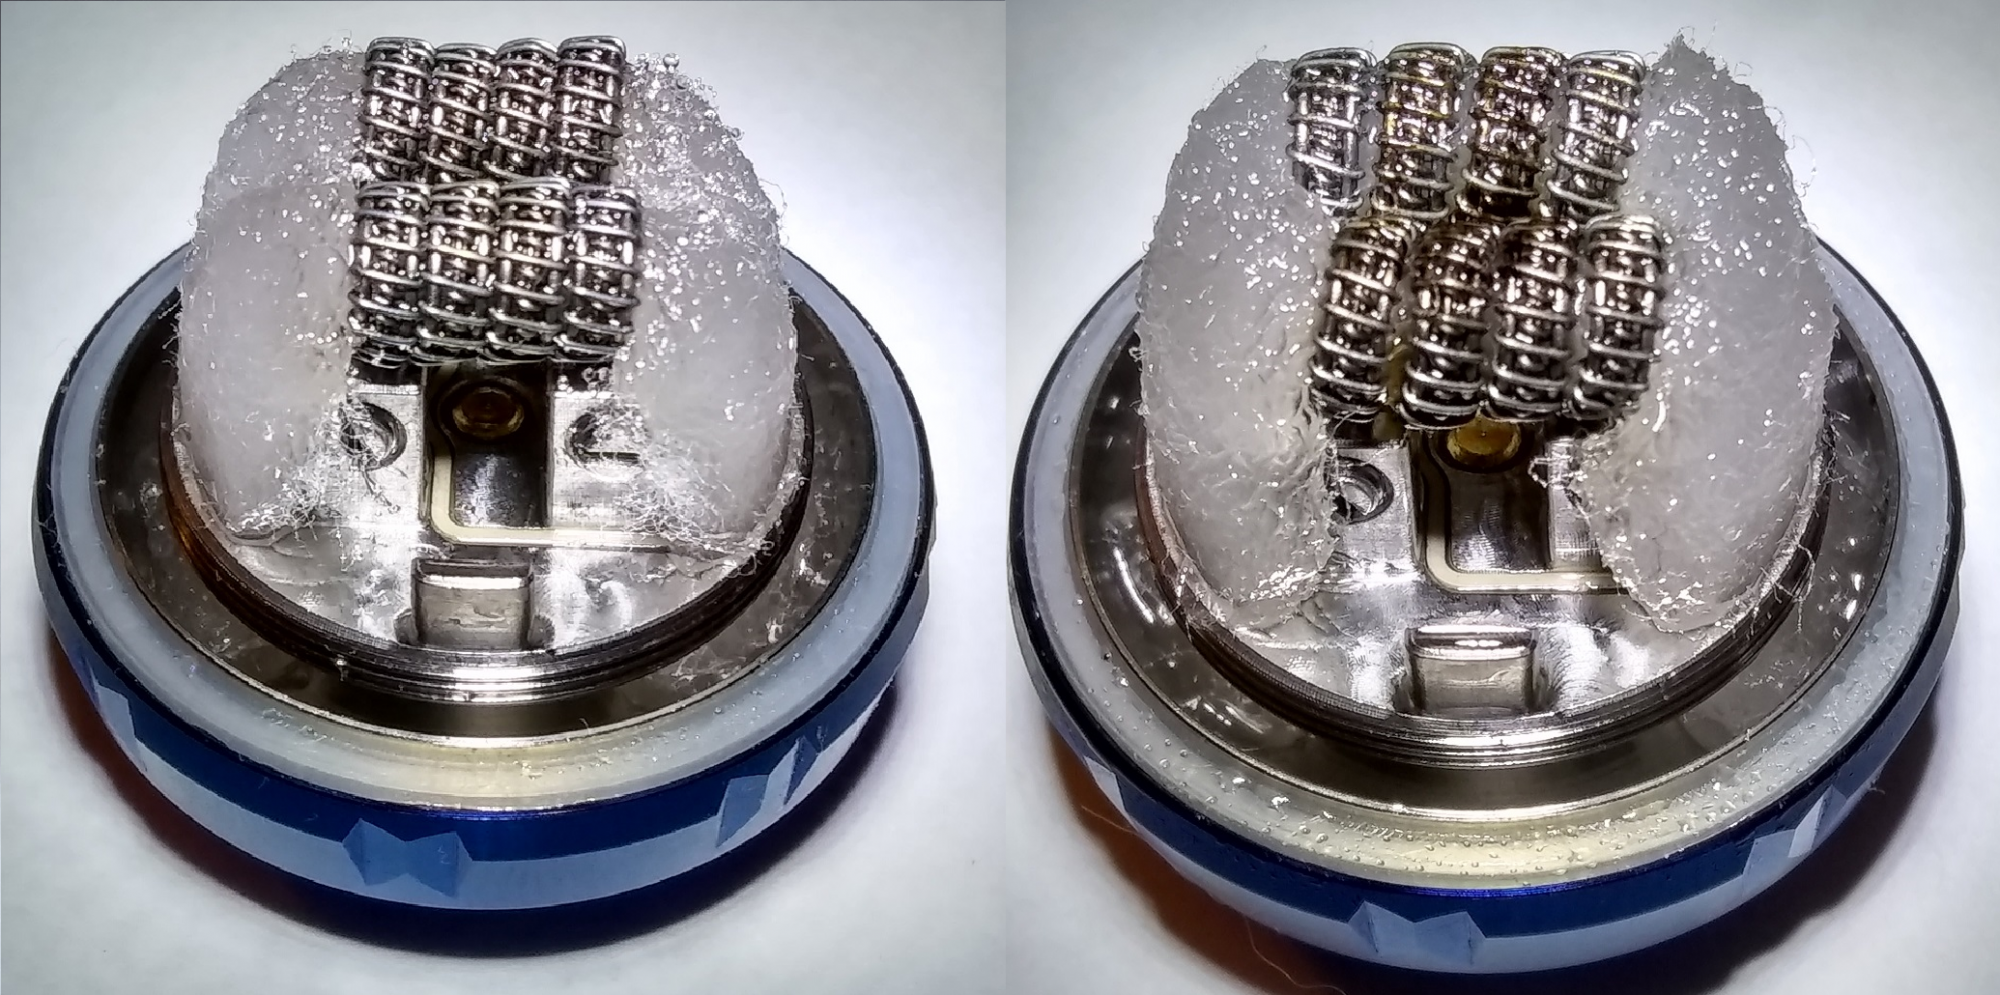 Identical 0.12Ω dual build, contact 110W (left), spaced 100W (right)